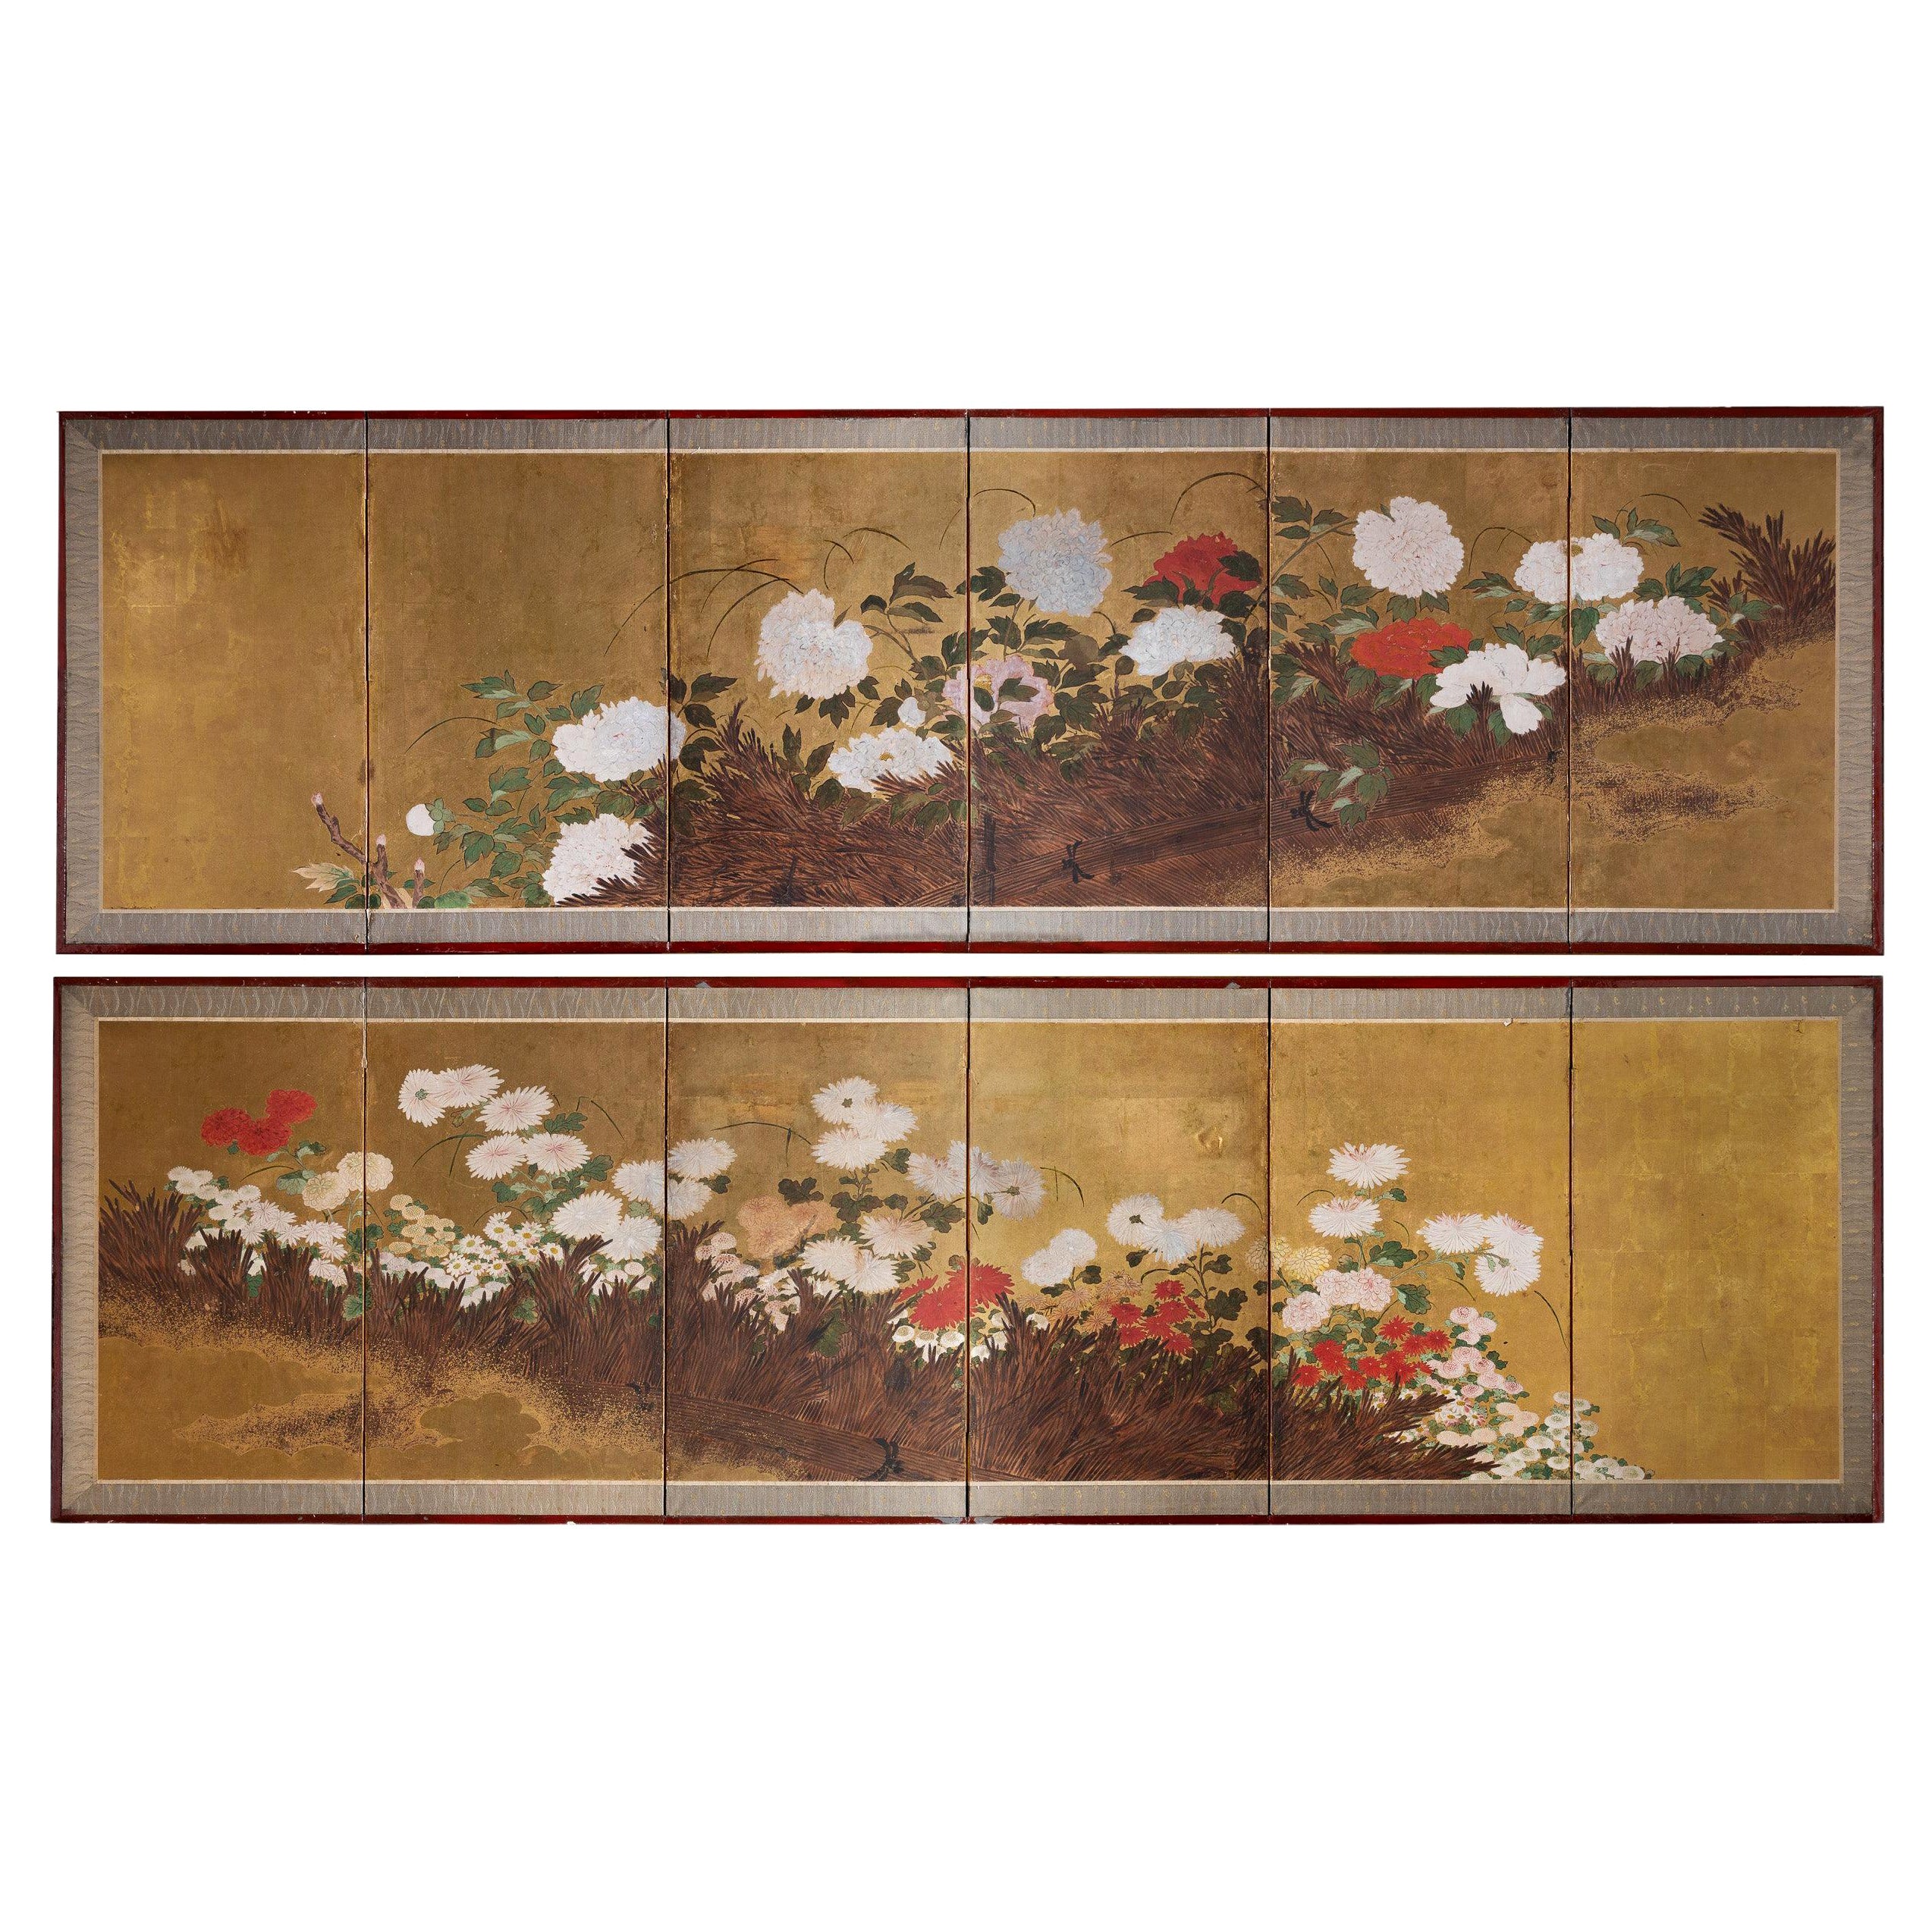 Pair of Six-Panel Folding Screens with Peonies and Other Flowers